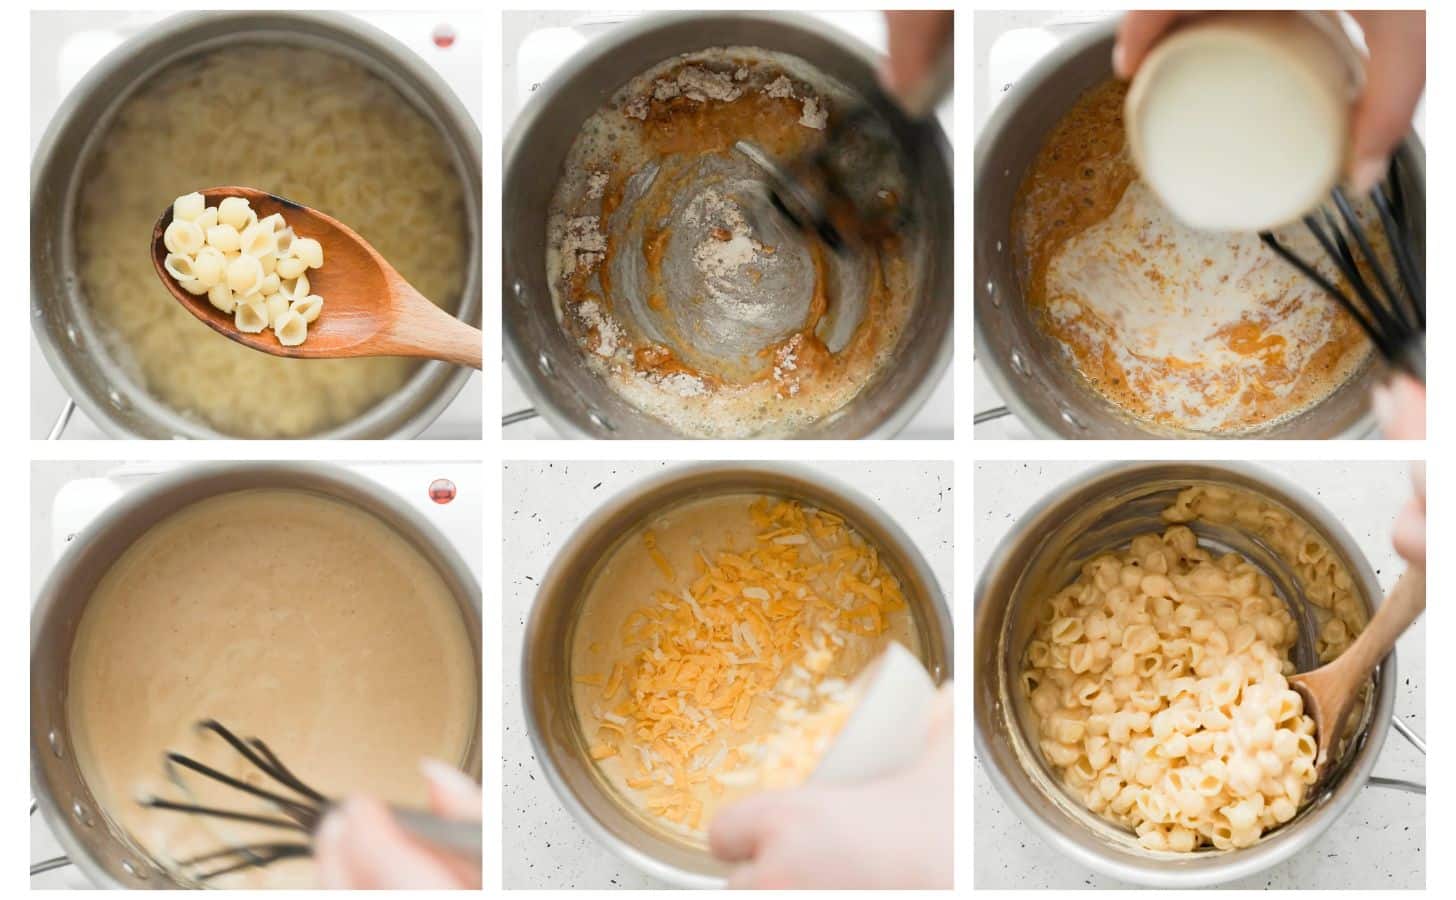 Six steps to making mac and cheese; in photo 1, a wood spoon is holding cooked pasta over a pot. In photo 2, a hand is whisking roux. In photo 3, a hand is pouring milk into the roux. In photo 4, a hand is whisking bechamel sauce. In photo 5, a hand is pouring cheese into the pot. In photo 6, a hand is mixing pasta into the cheese sauce.